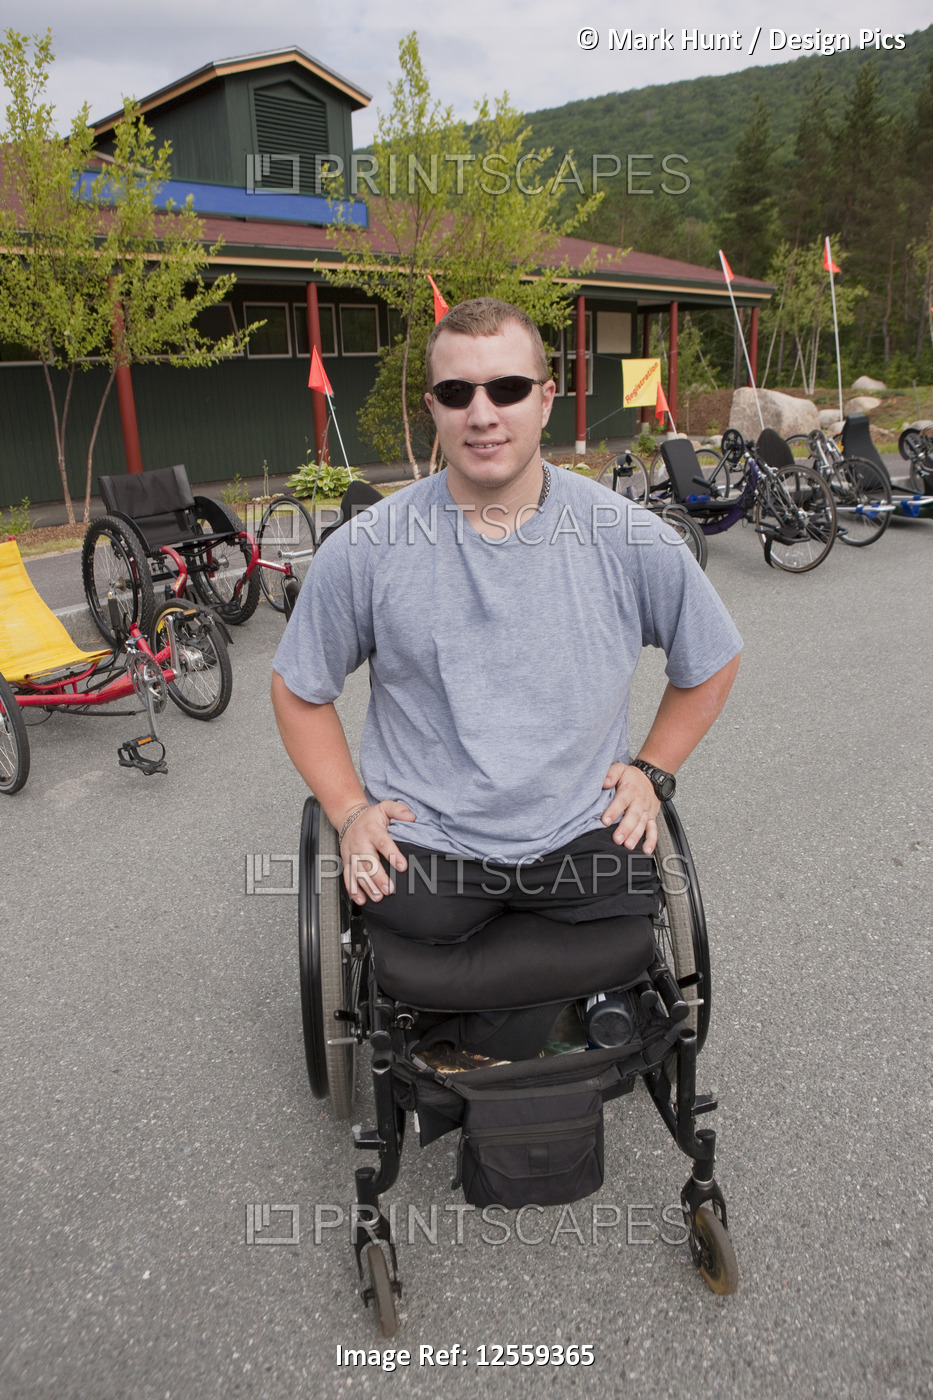 Man with leg amputee in a wheelchair preparing for a race